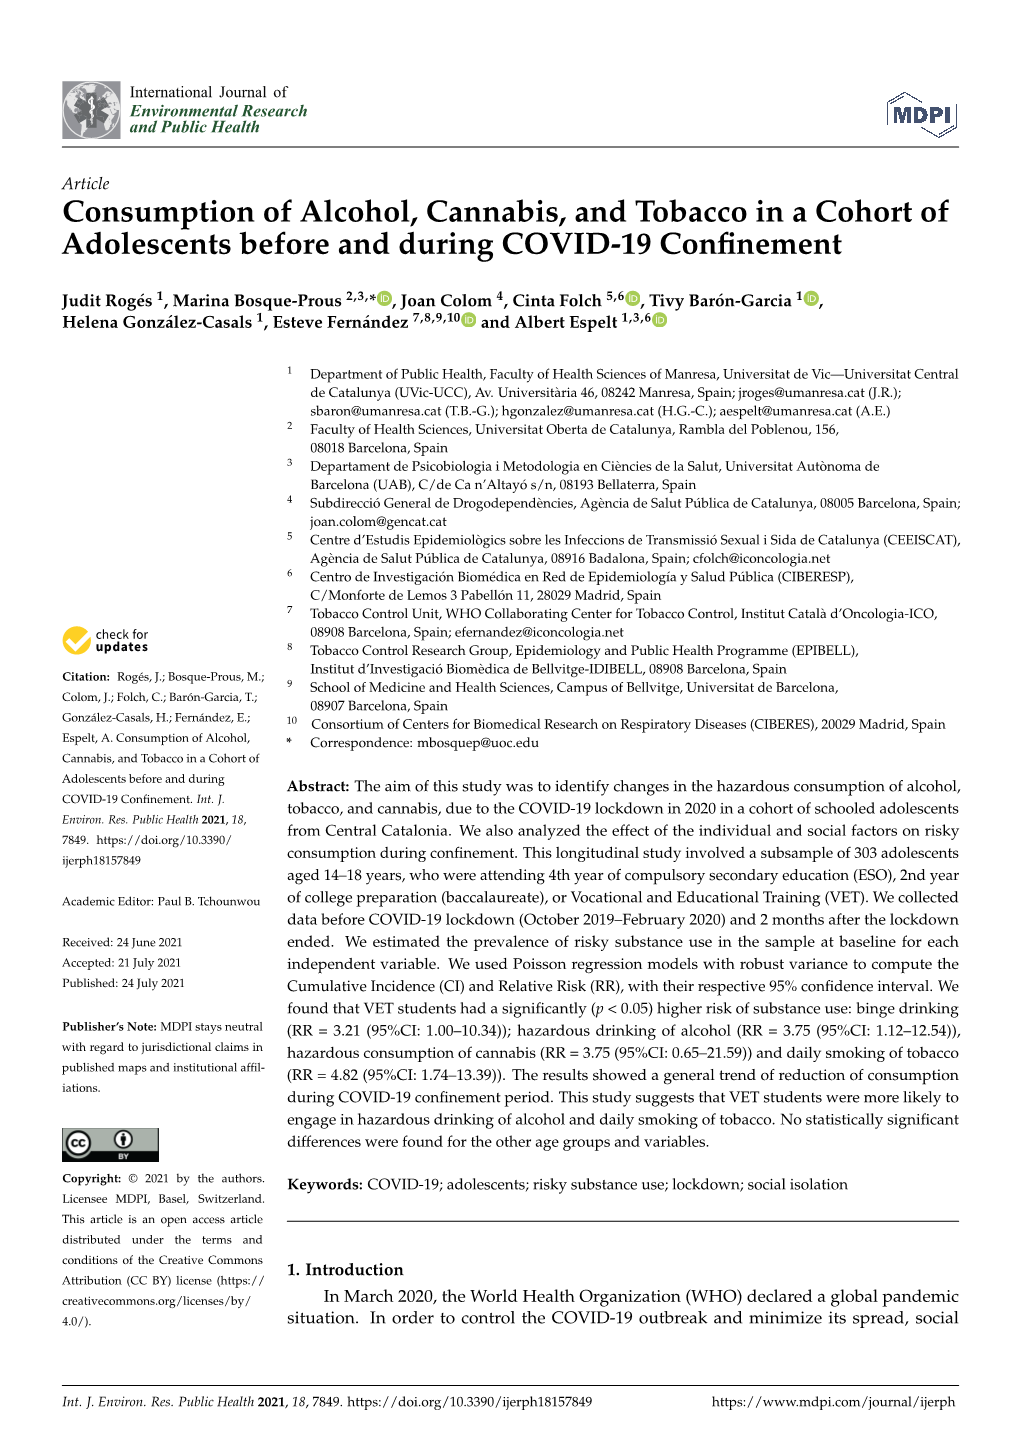 Consumption of Alcohol, Cannabis, and Tobacco in a Cohort of Adolescents Before and During COVID-19 Confinement